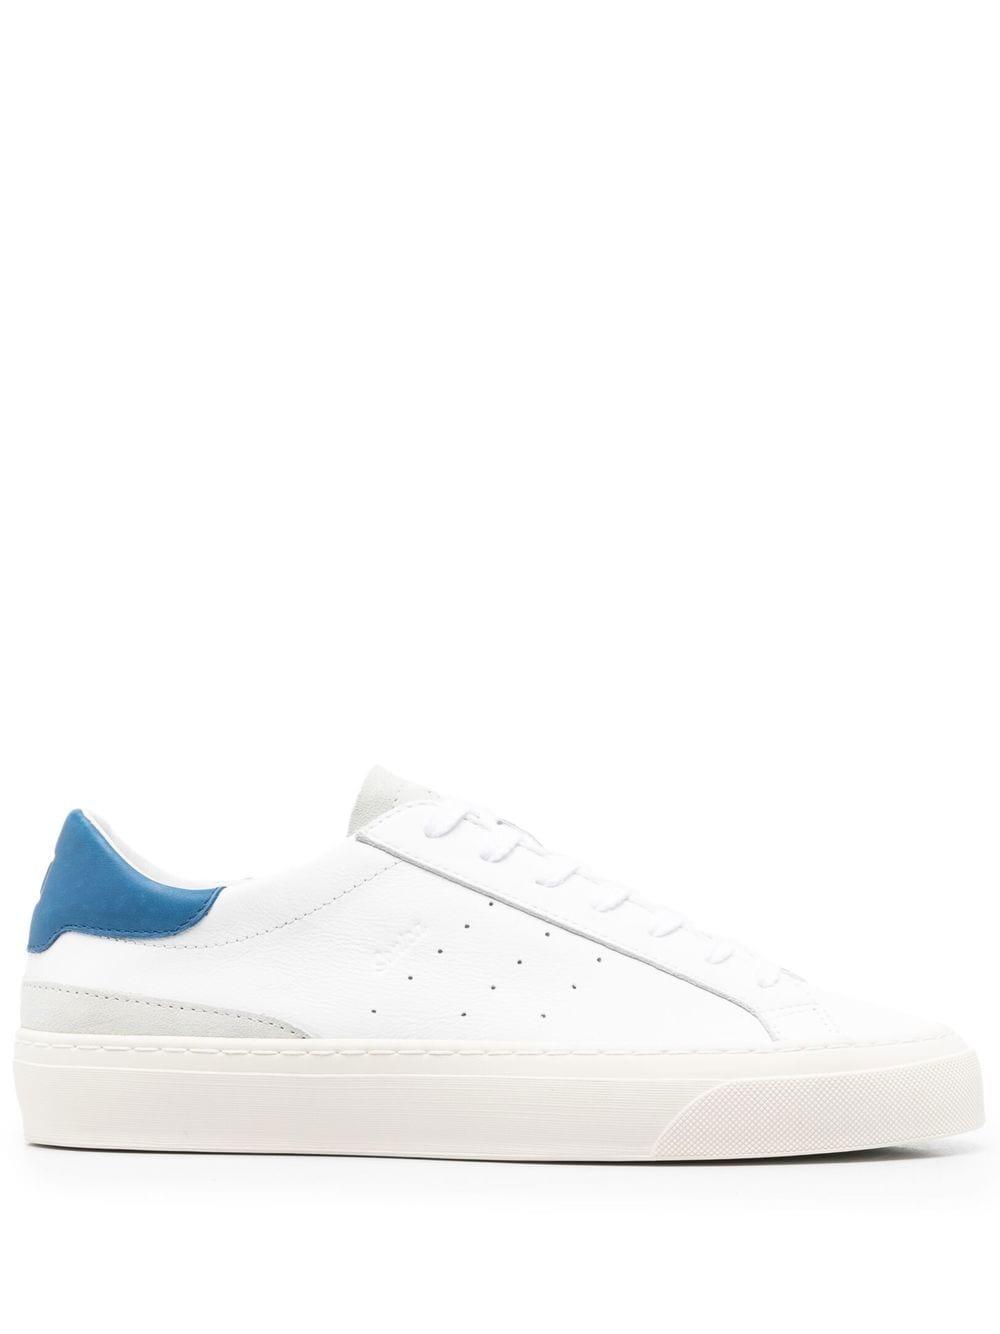 Date Sonica Leather Low-top Sneakers in White for Men | Lyst